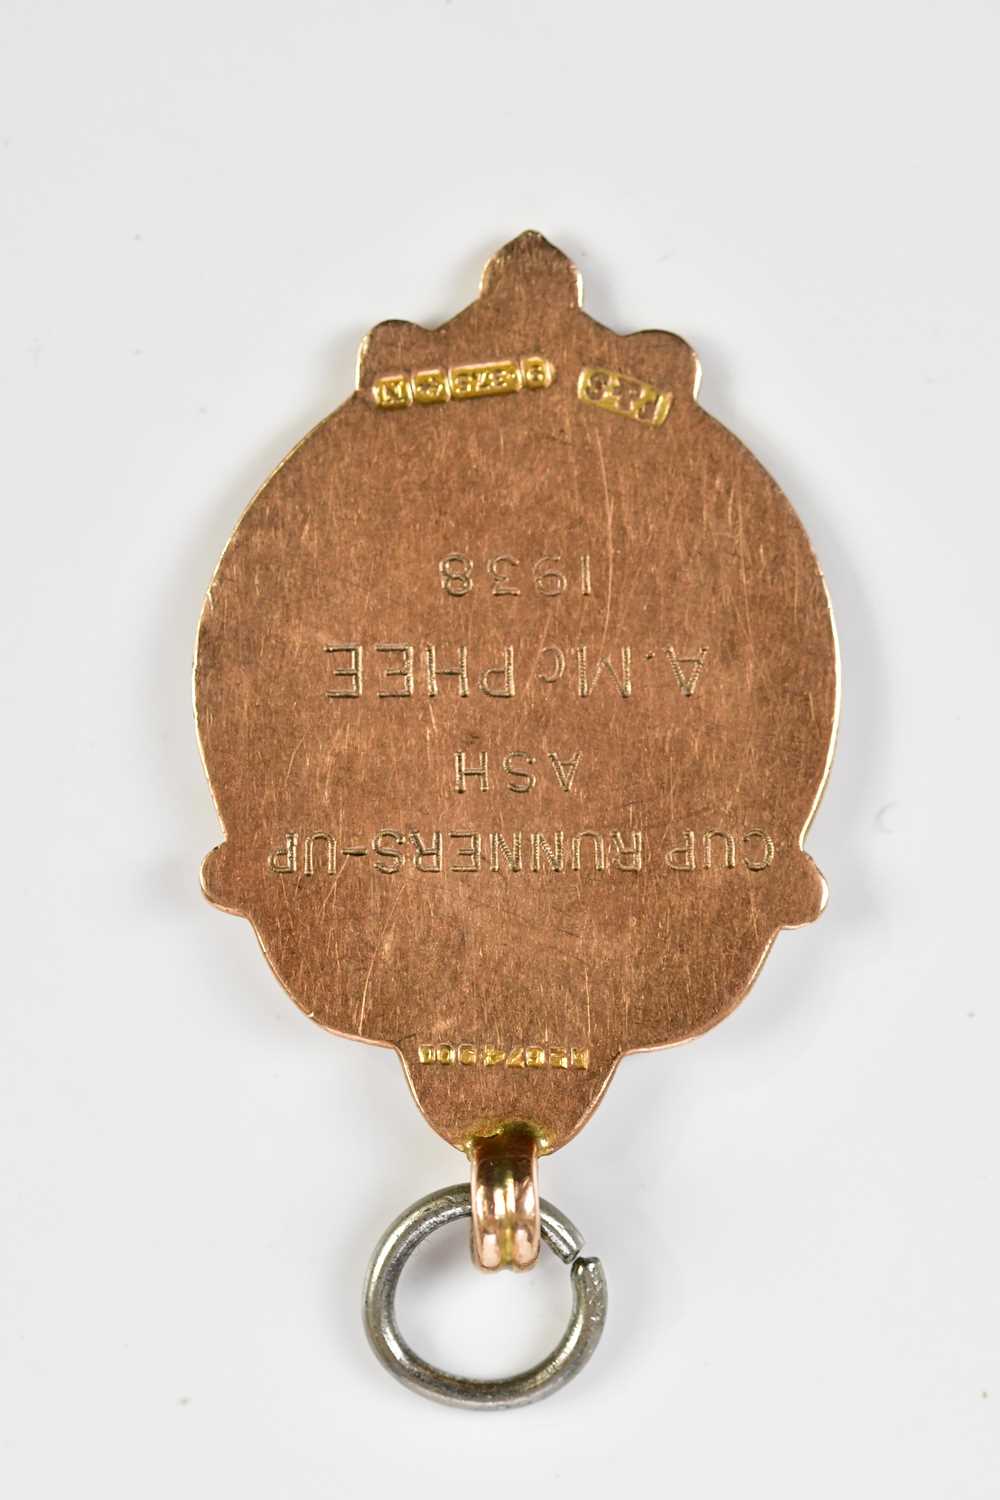 A 9ct yellow gold Stockport Area Dart League medal, inscribed to the back 'Cup Runners Up Ash A. - Image 2 of 4